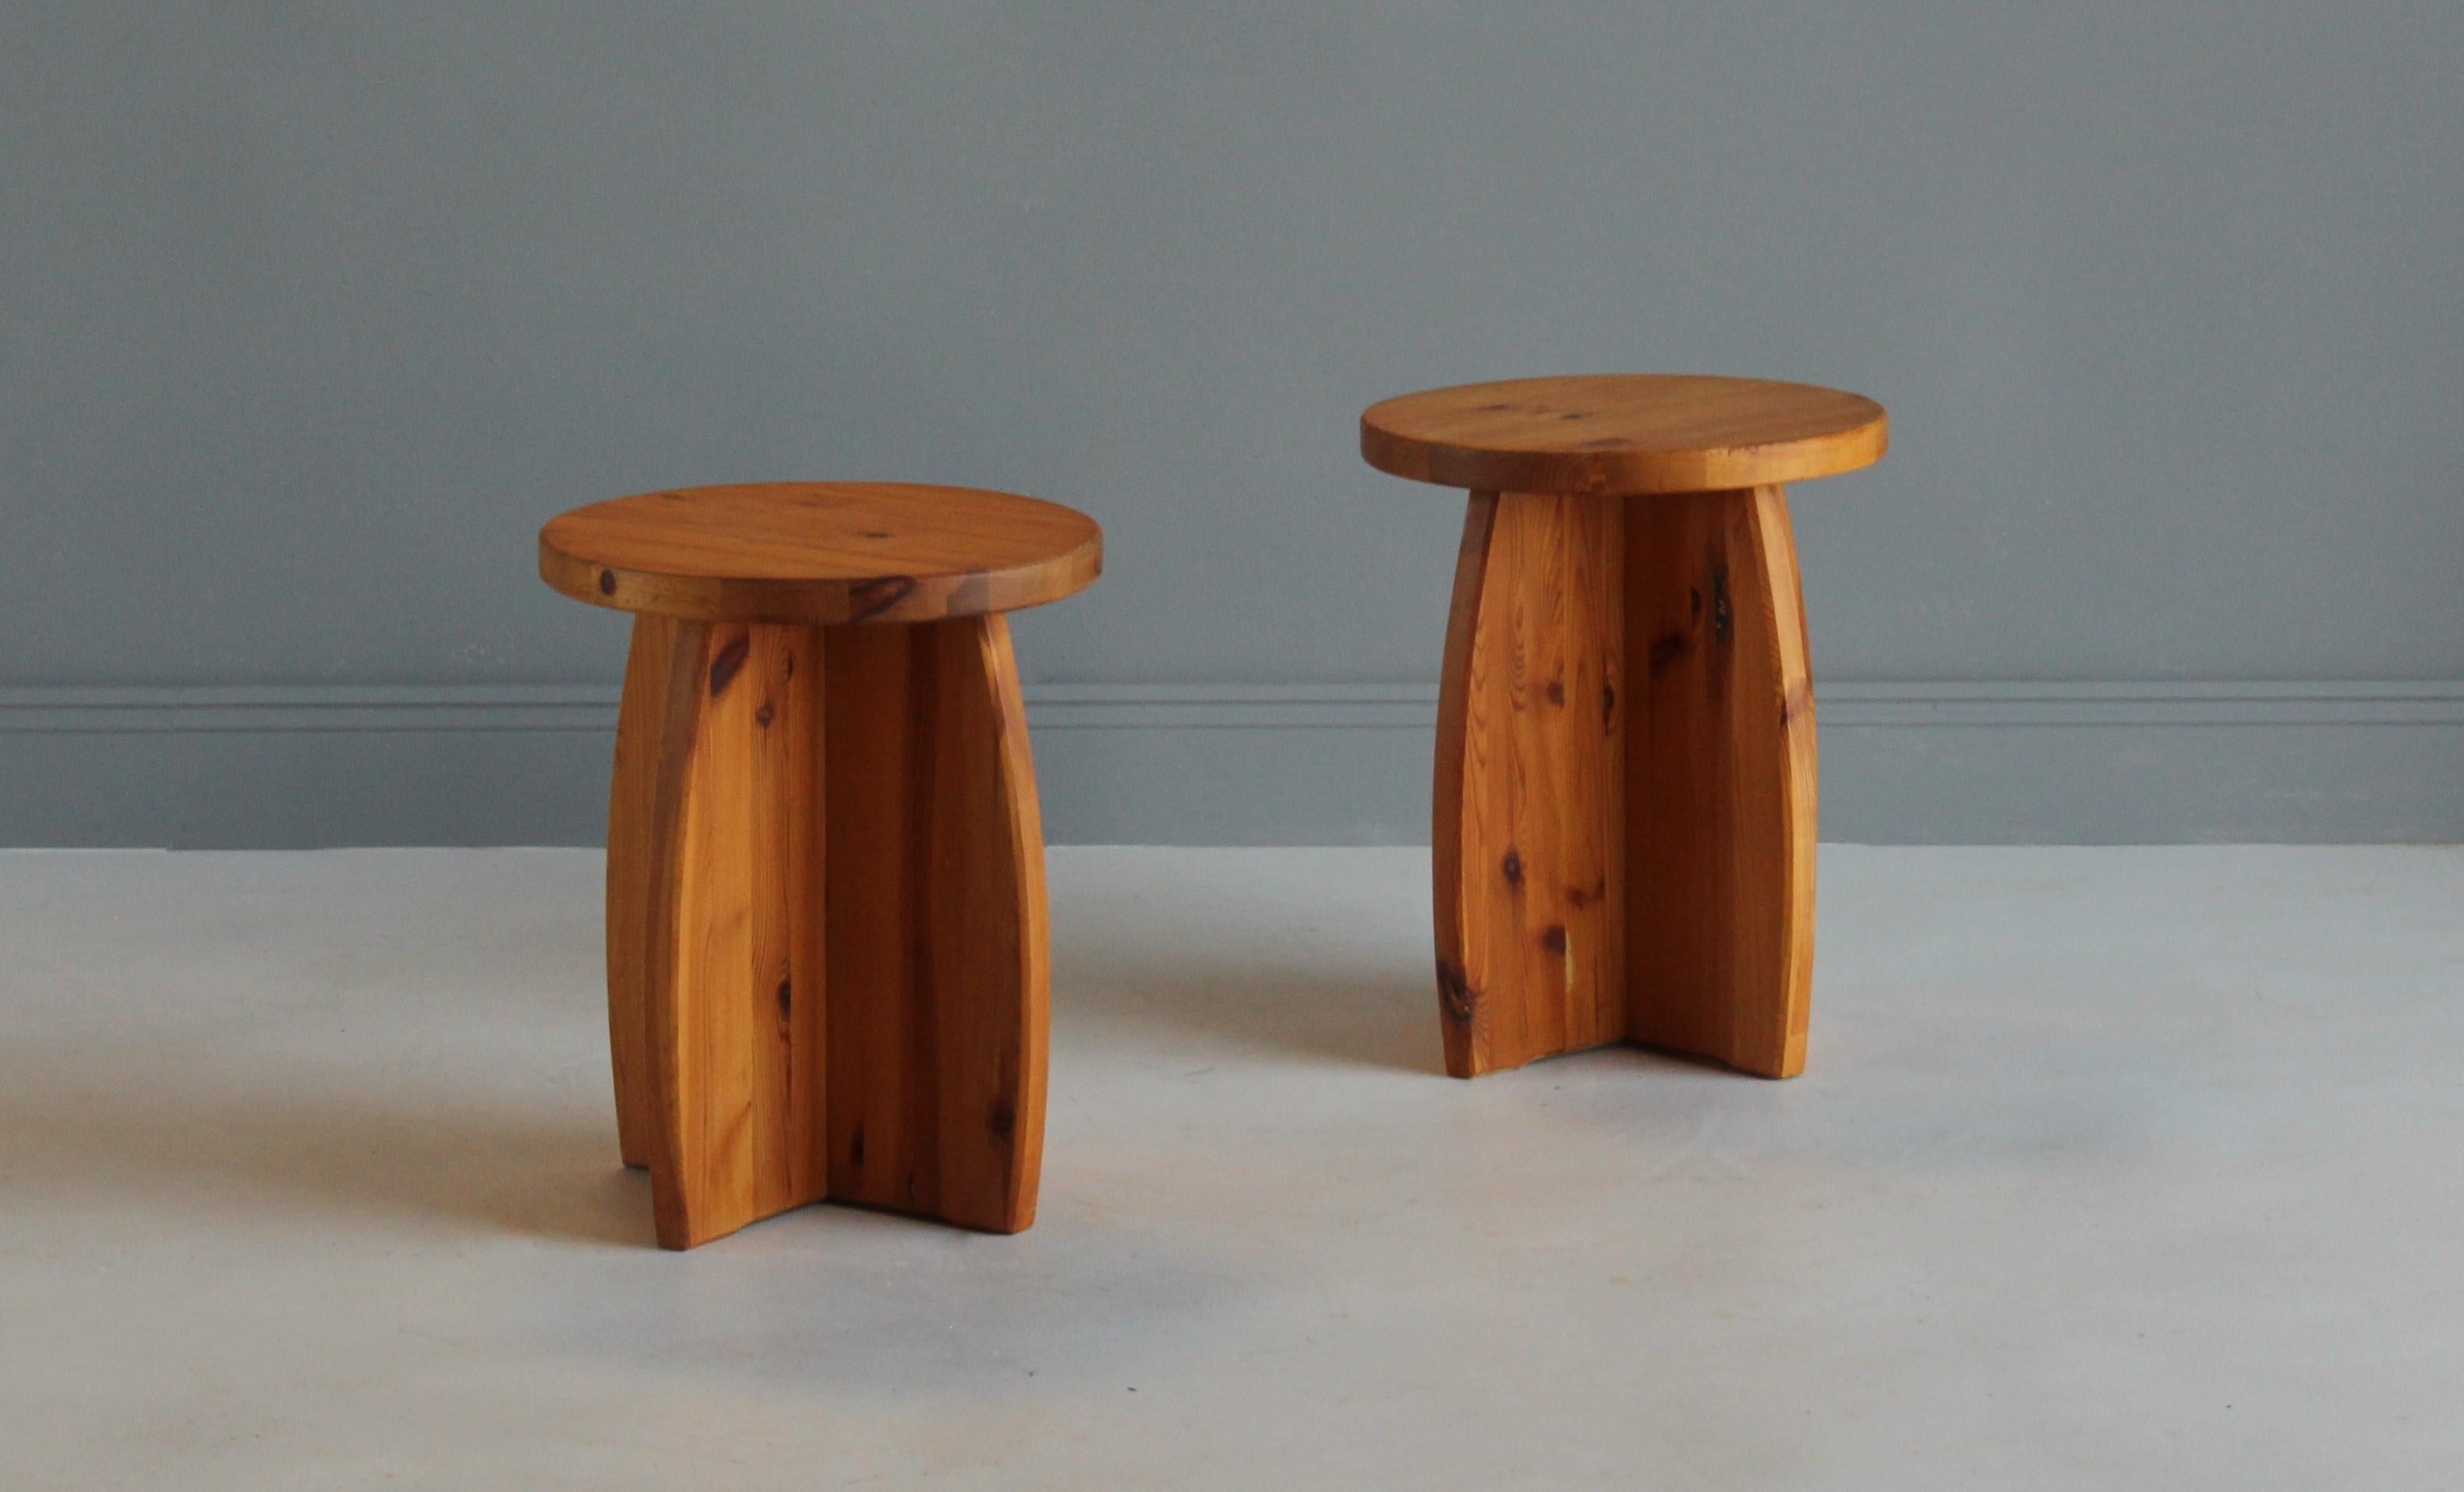 A pair of Swedish pinewood stools / side tables. By unknown designer, 1970s. The purity of form enhances the beauty of the wood.

Other designers working in similar minimal fashion and materials include Axel Einar Hjorth, Roland Wilhelmsson,